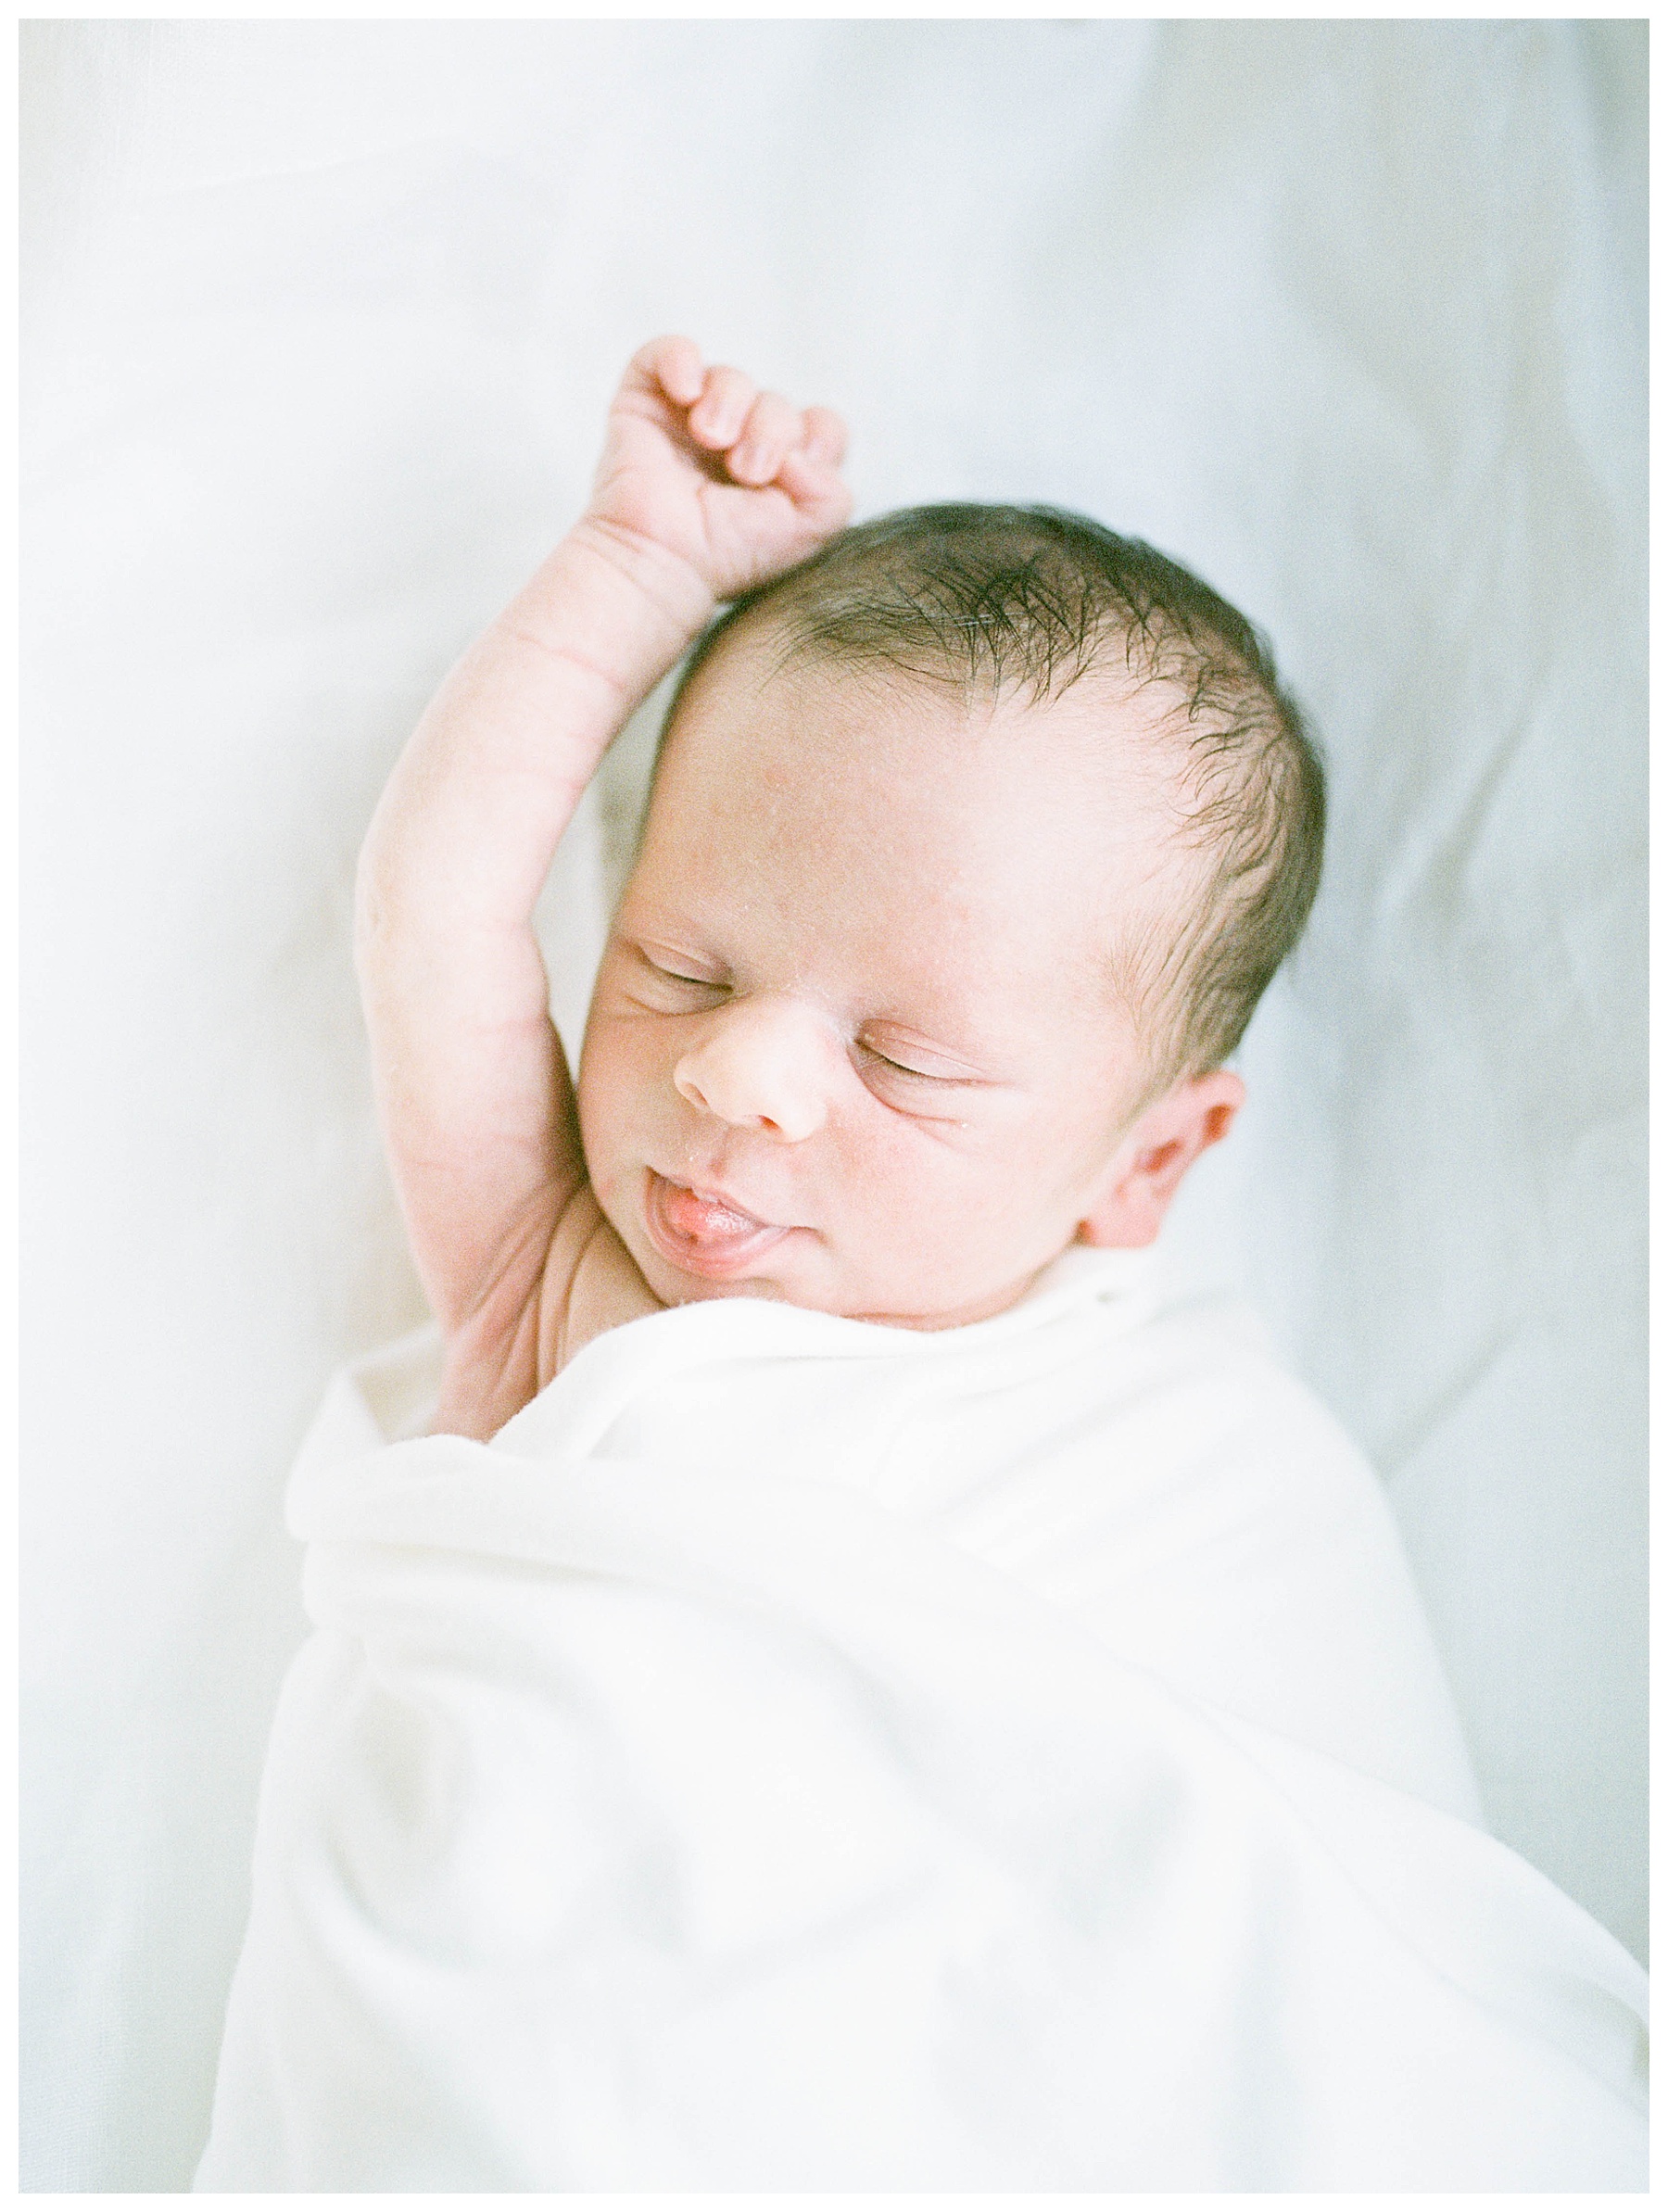 newborn baby with right arm raised over his head